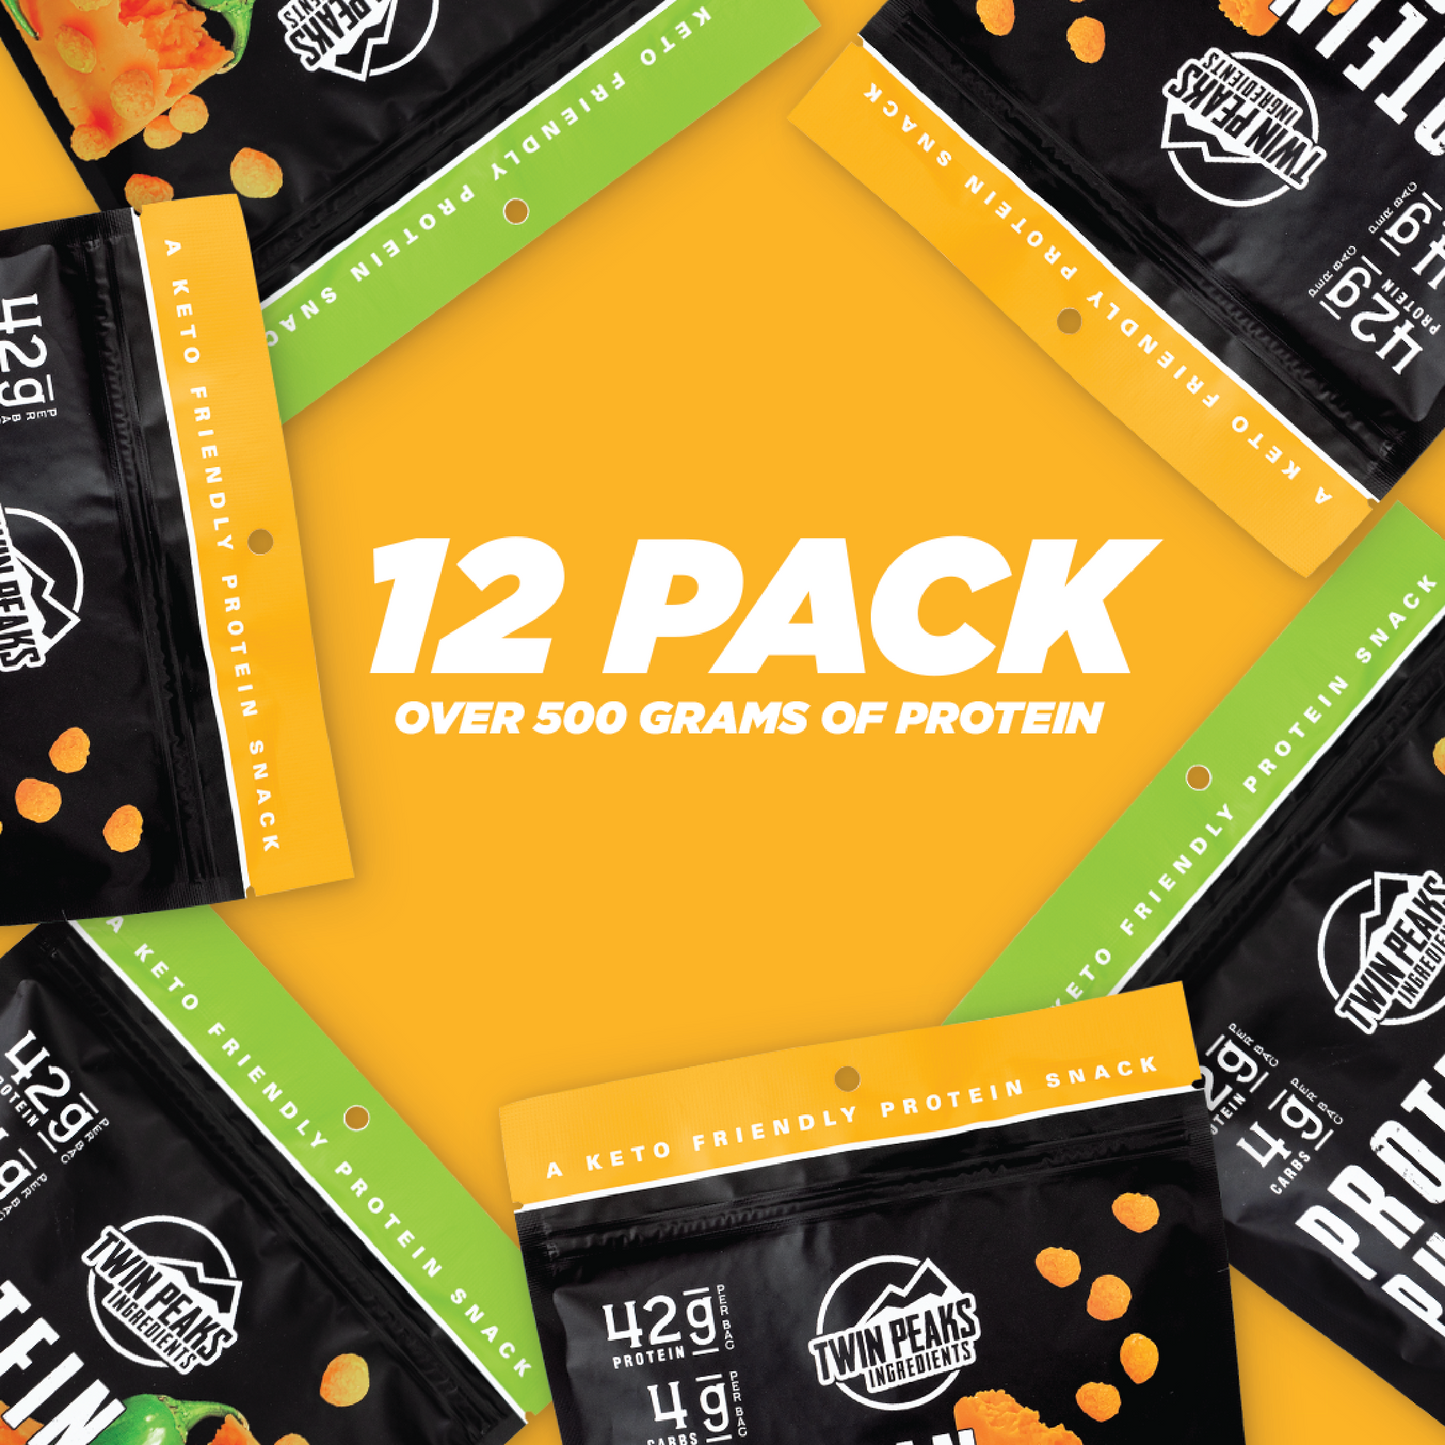 12 Pack - Over 500 grams of protein